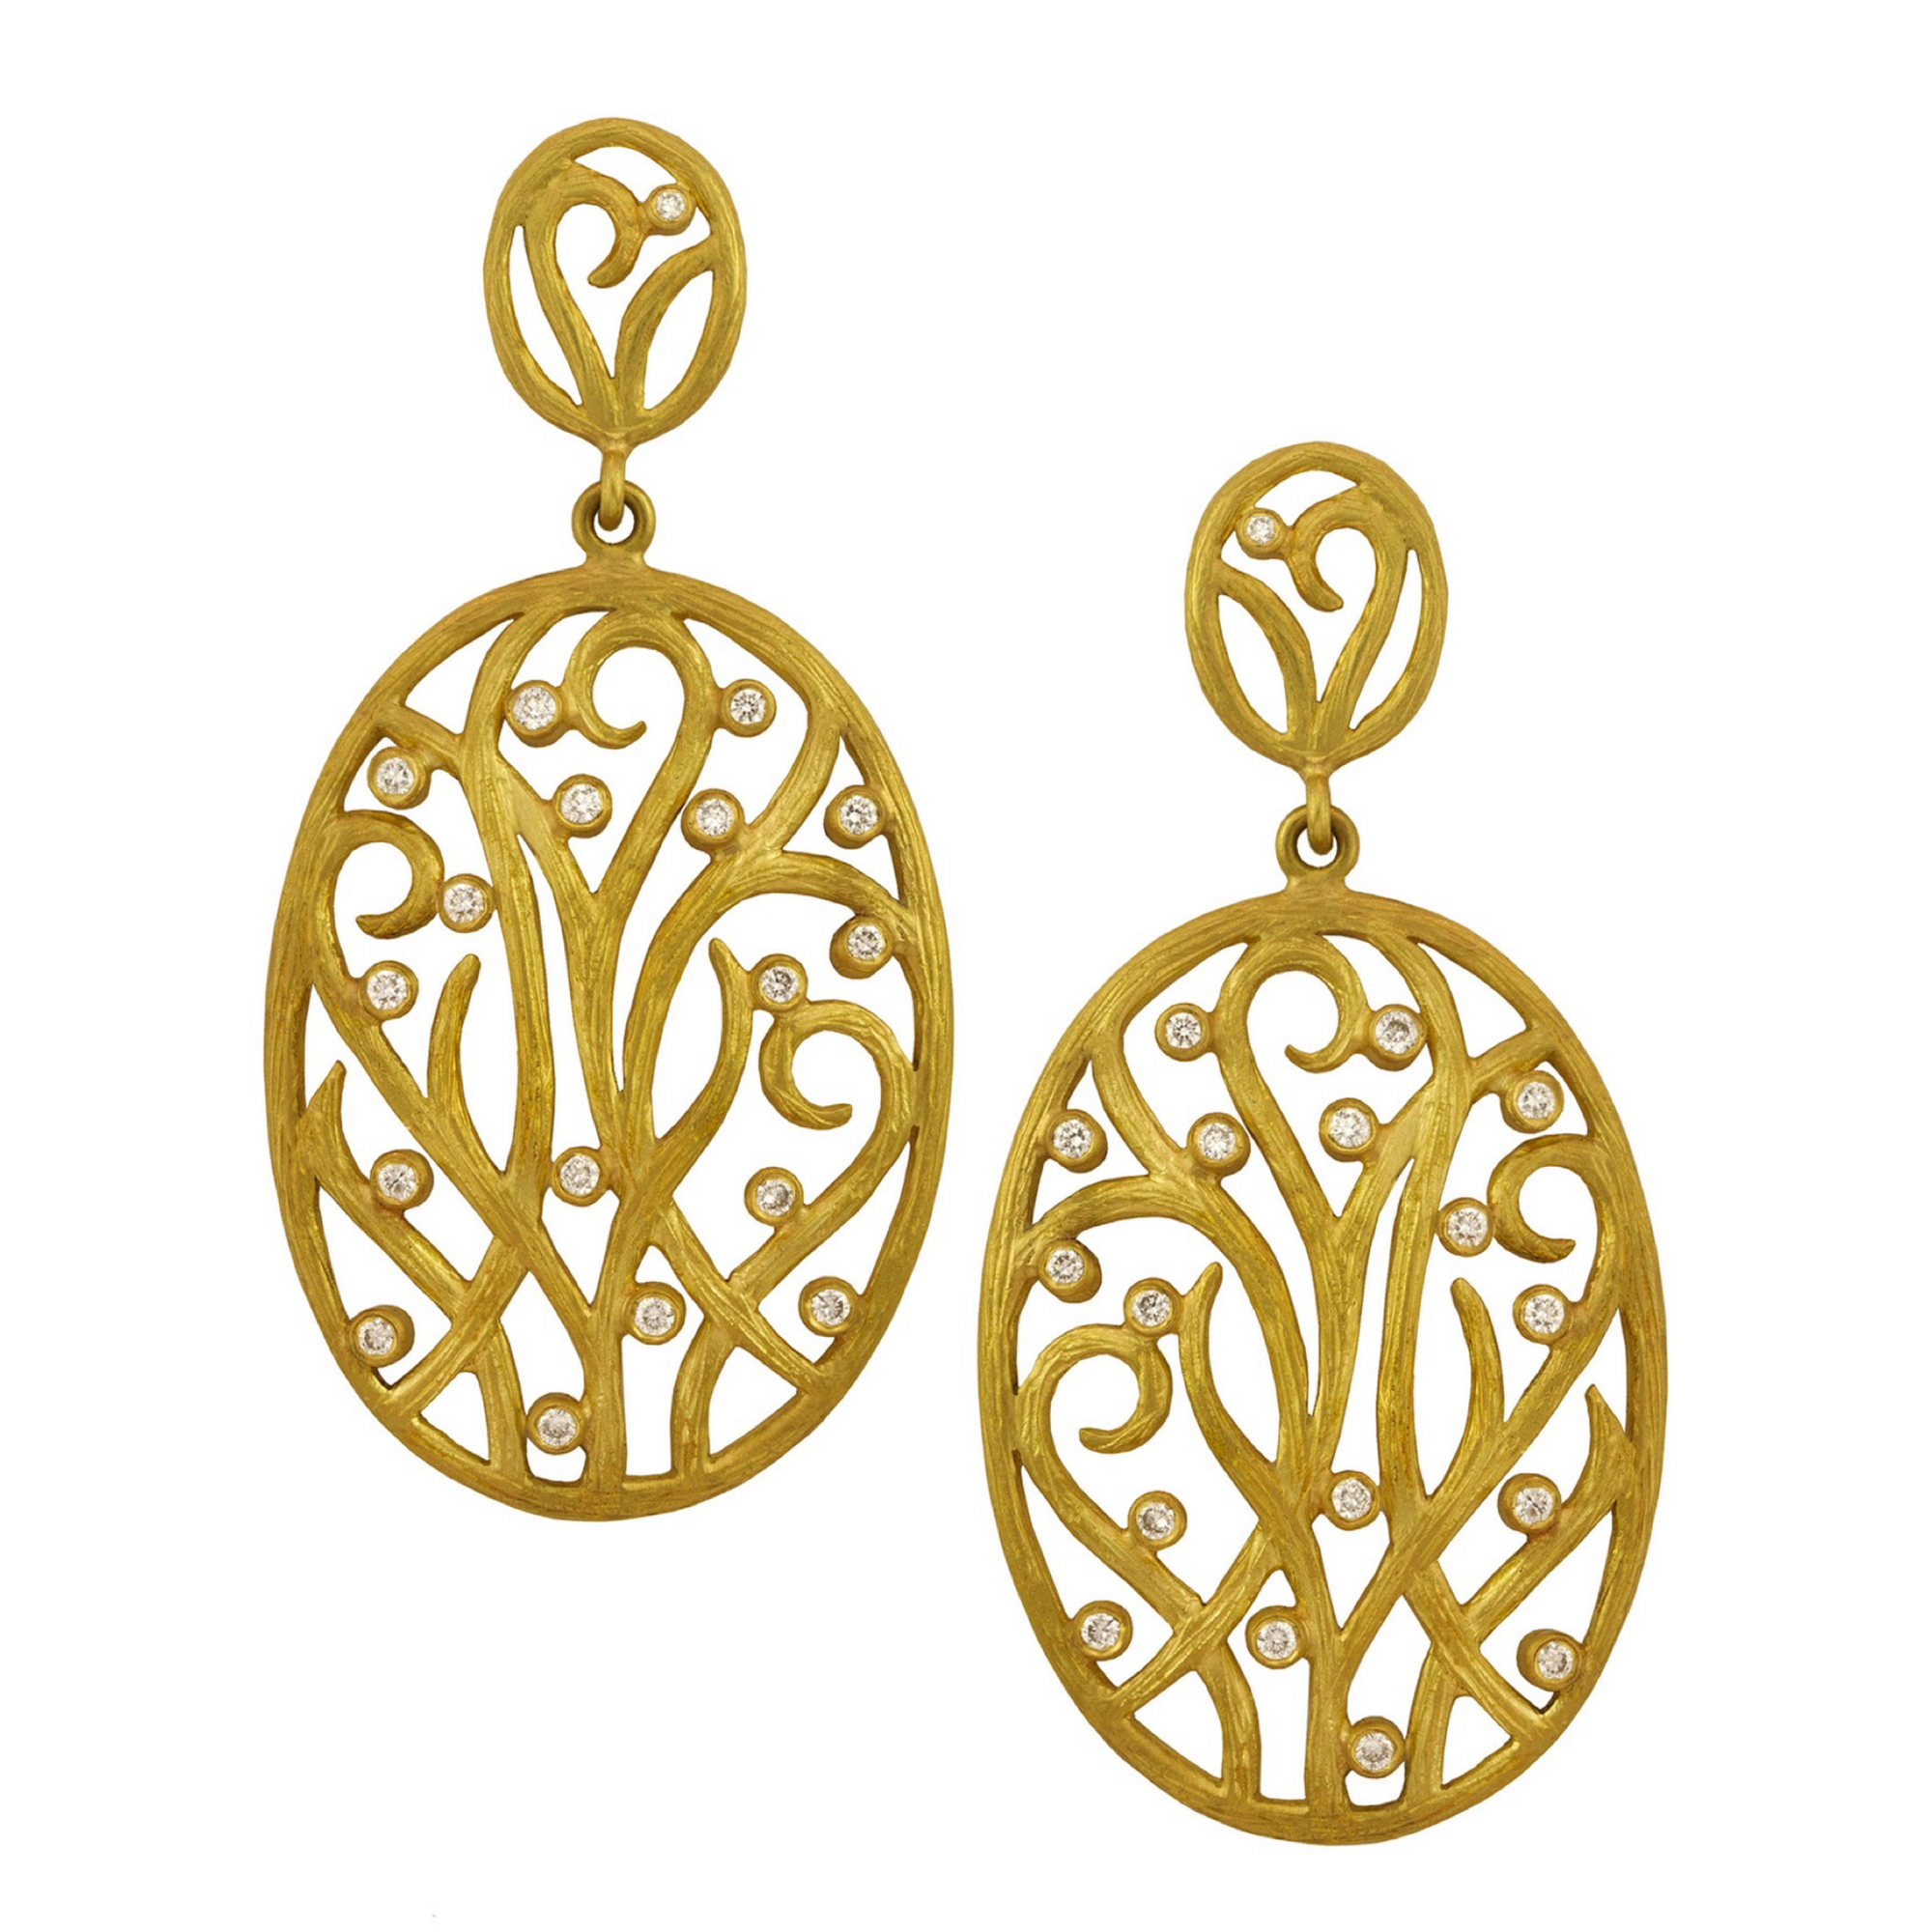 Vine Oval Cut Work Diamond Earrings by Laurie Kaiser available at Talisman Collection Fine Jewelers in El Dorado Hills, CA and online. The perfect addition to your jewelry collection, the Vine Oval Cut Work Diamond Earrings in 18k yellow gold are a romantic pair of statement earrings. With delicate scrolling vines and a total of 0.94 carats of sparkling white brilliant diamonds, these earrings are truly eye-catching. 